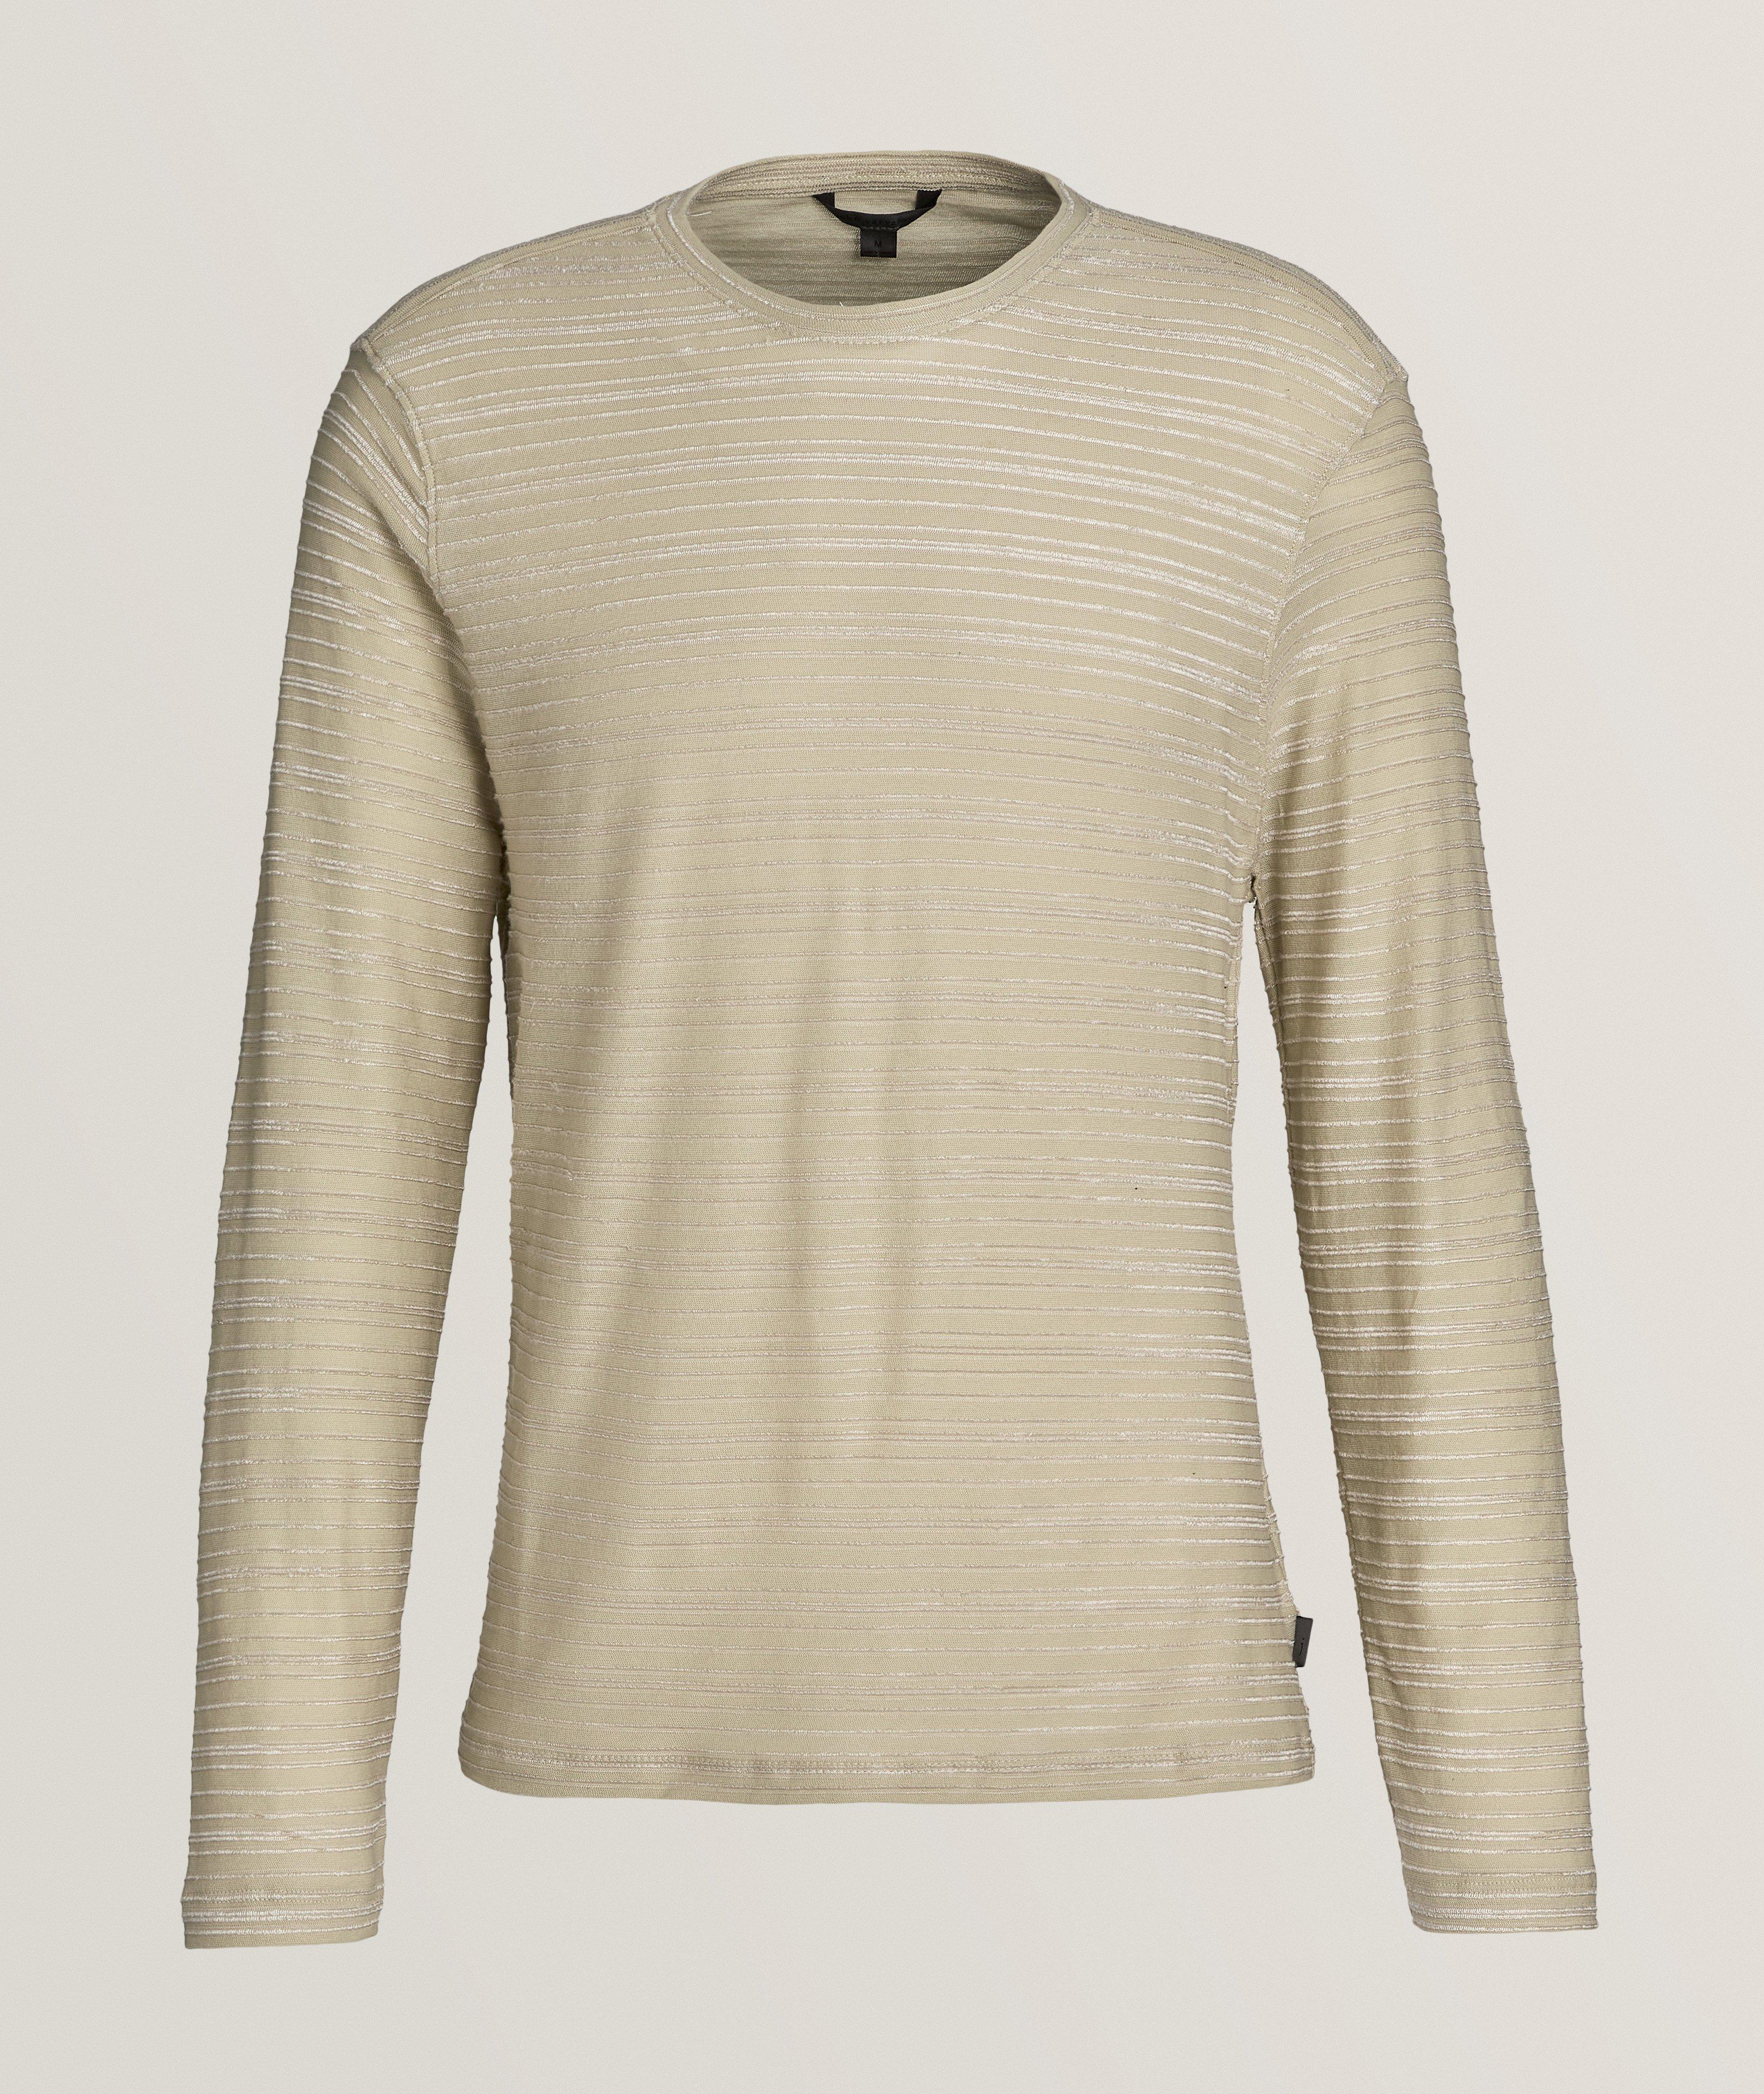 Textured-Striped Cotton-Blend Sweater image 0